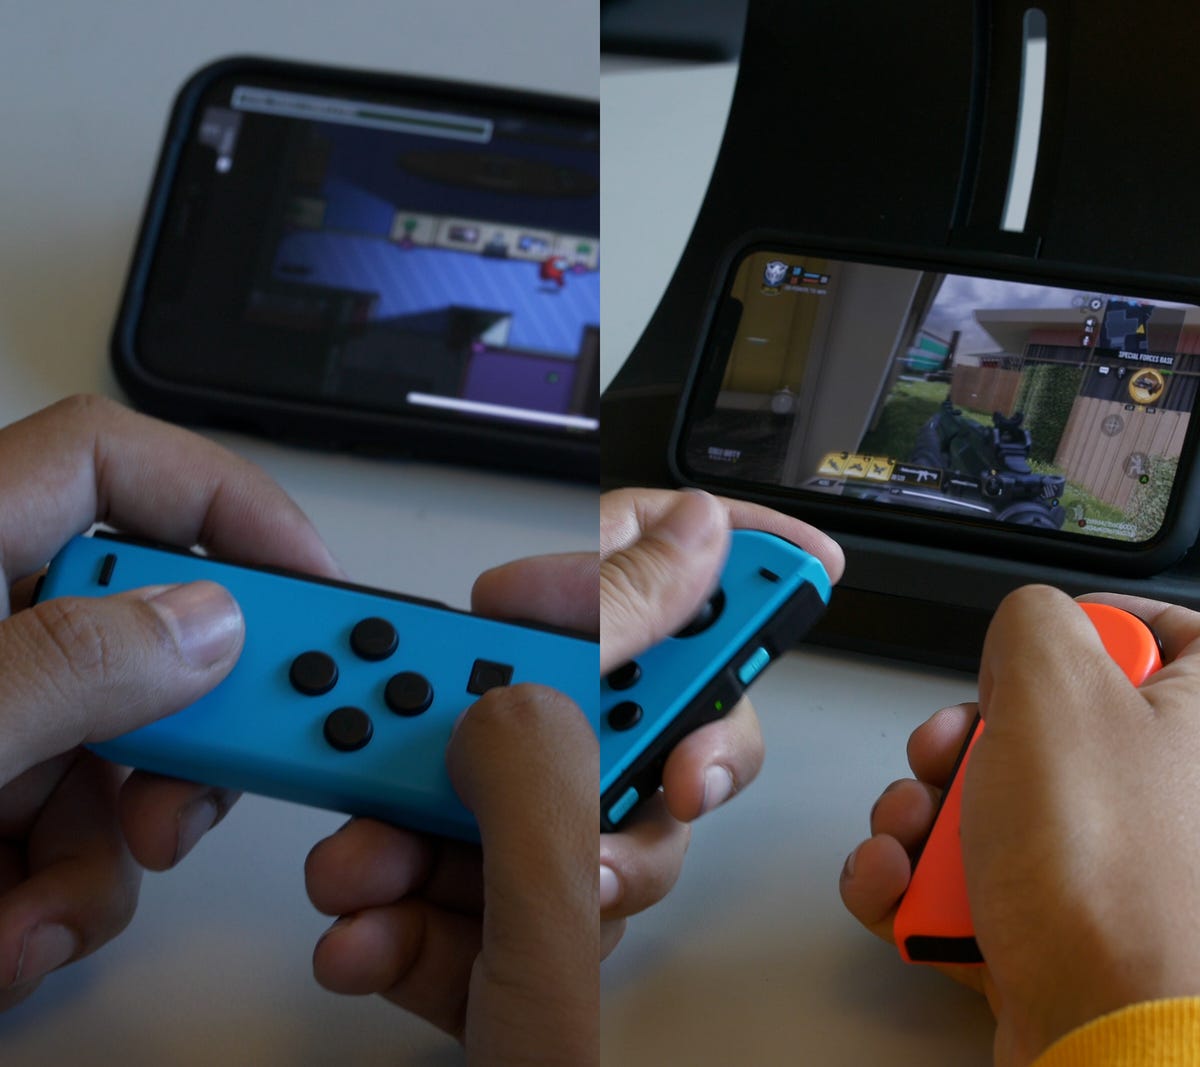 iOS 16: Use Your Switch Joy-Cons to Play Games on Your iPhone and iPad
                        If your Nintendo Switch is dead, you can use the Joy-Con controllers over on your Apple device.